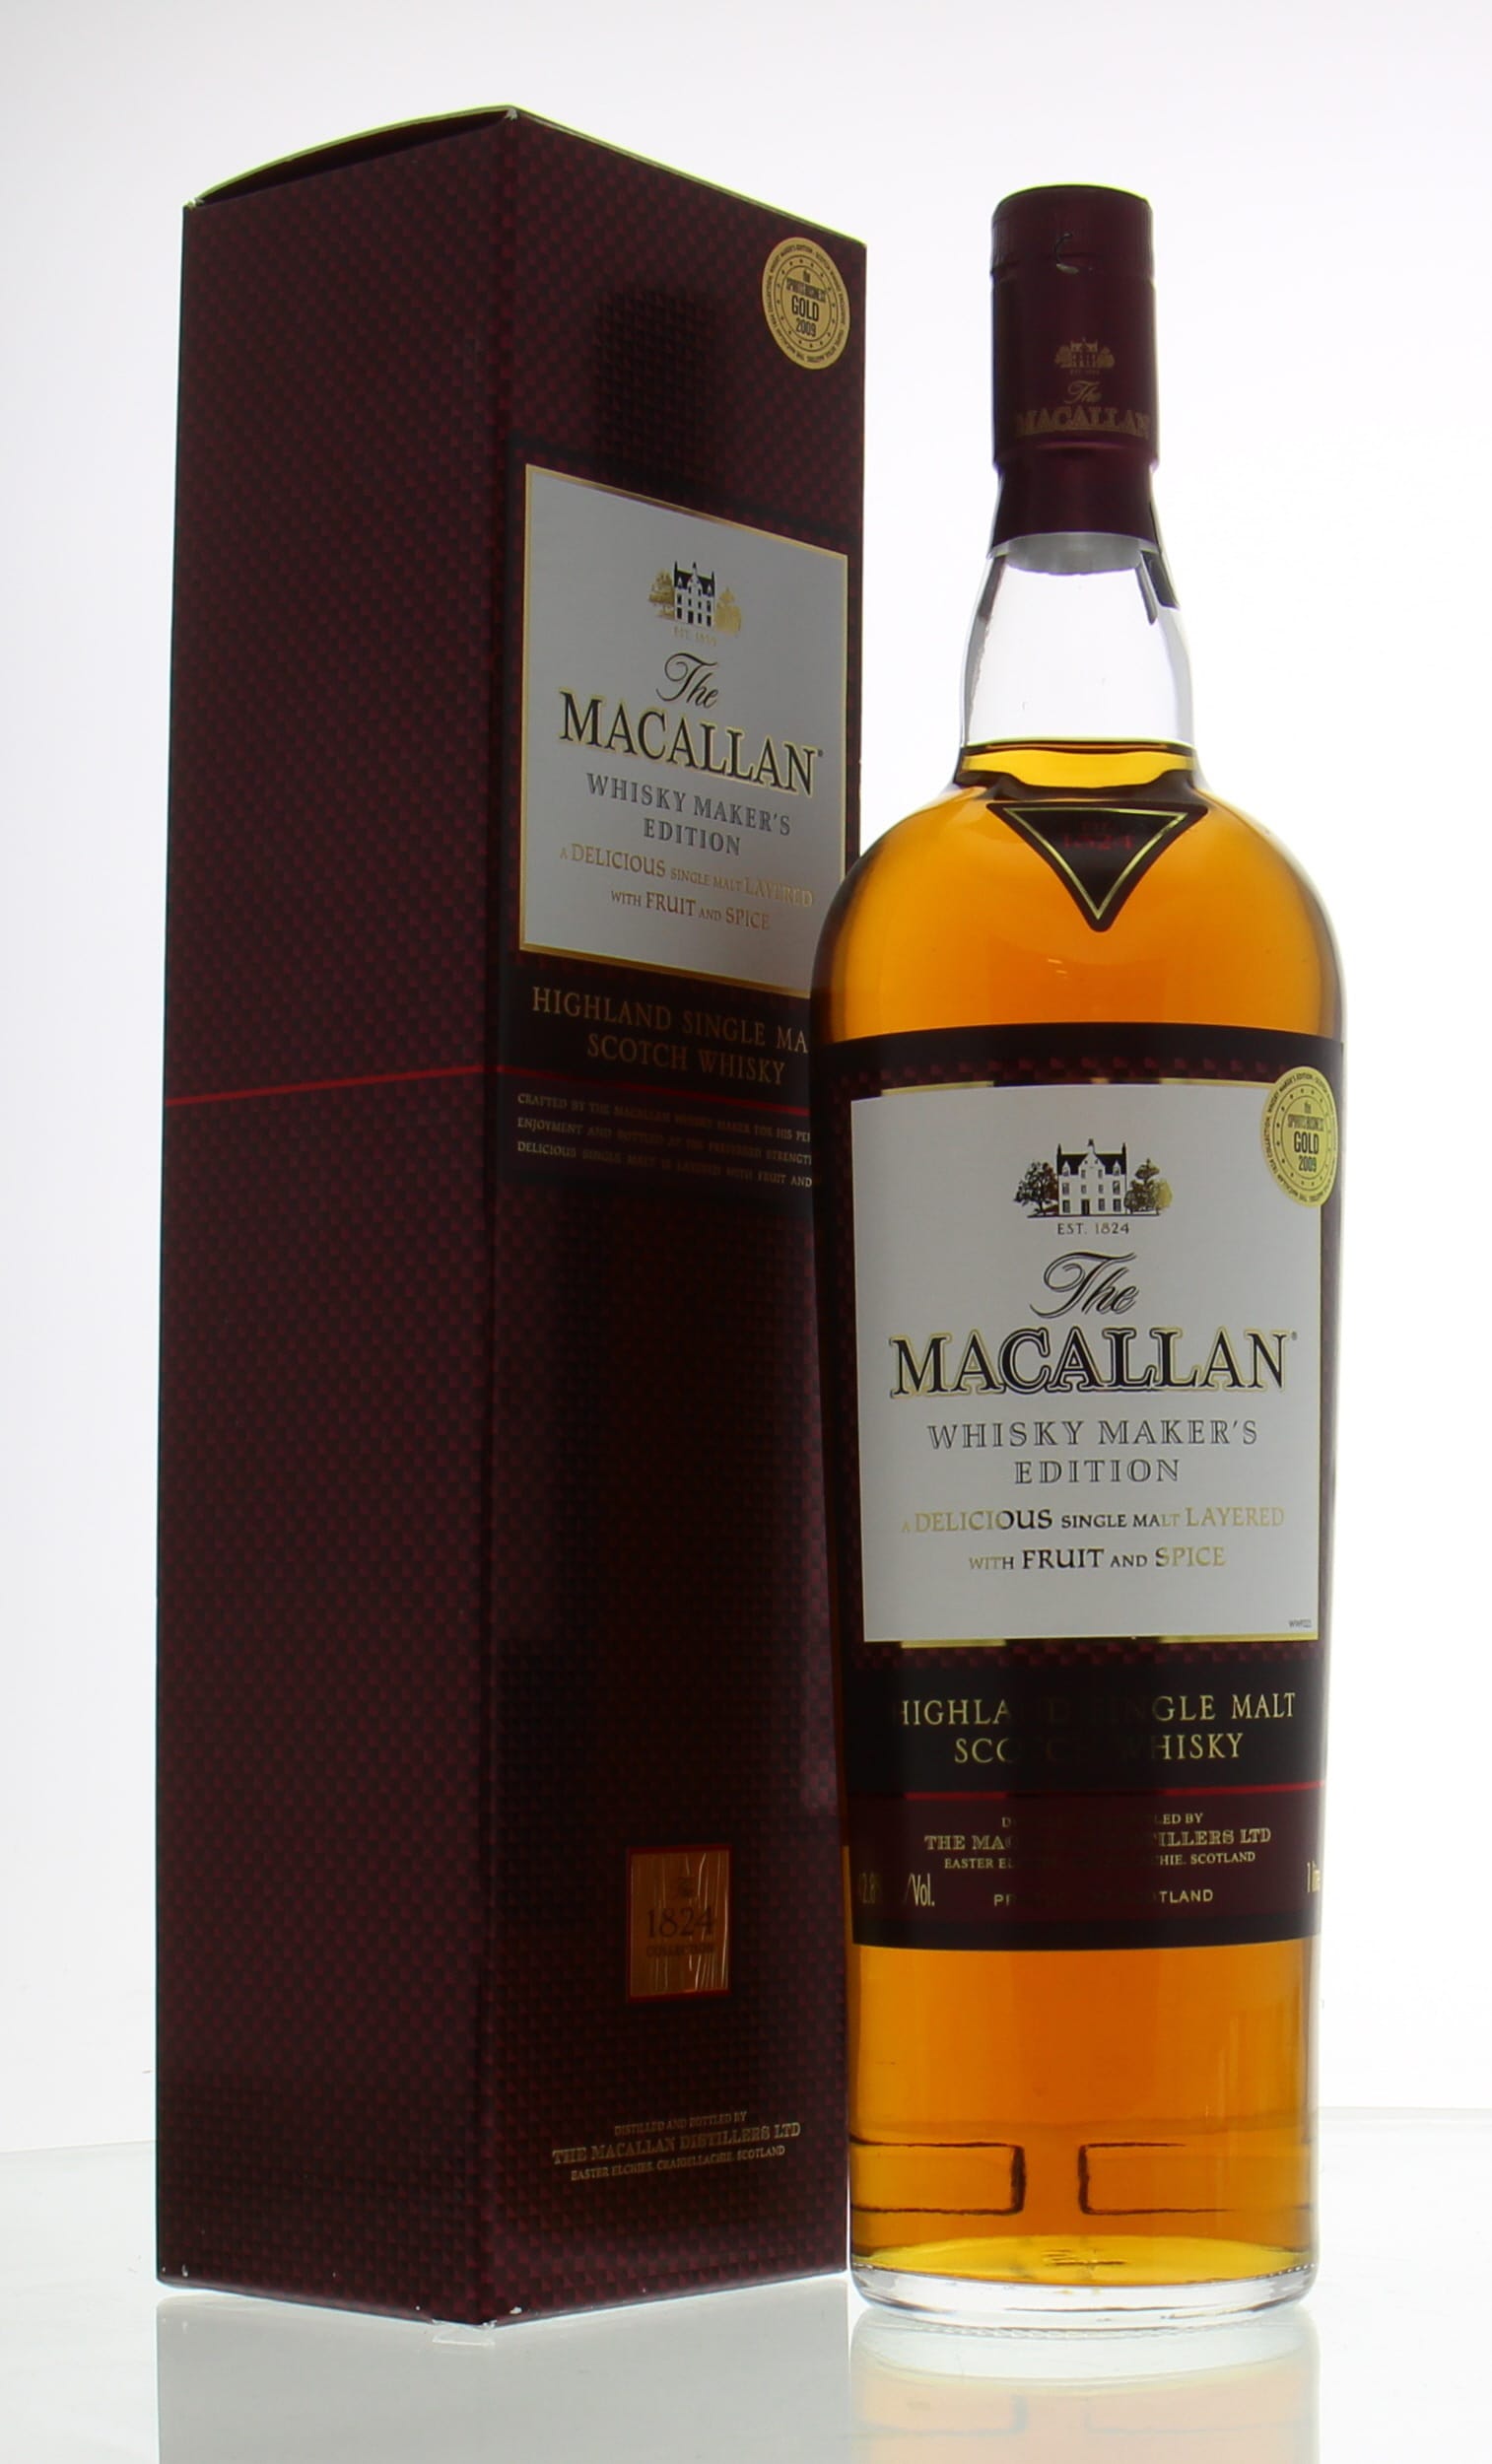 Macallan - Whisky Maker's Edition The 1824 Collection 42.8% NV